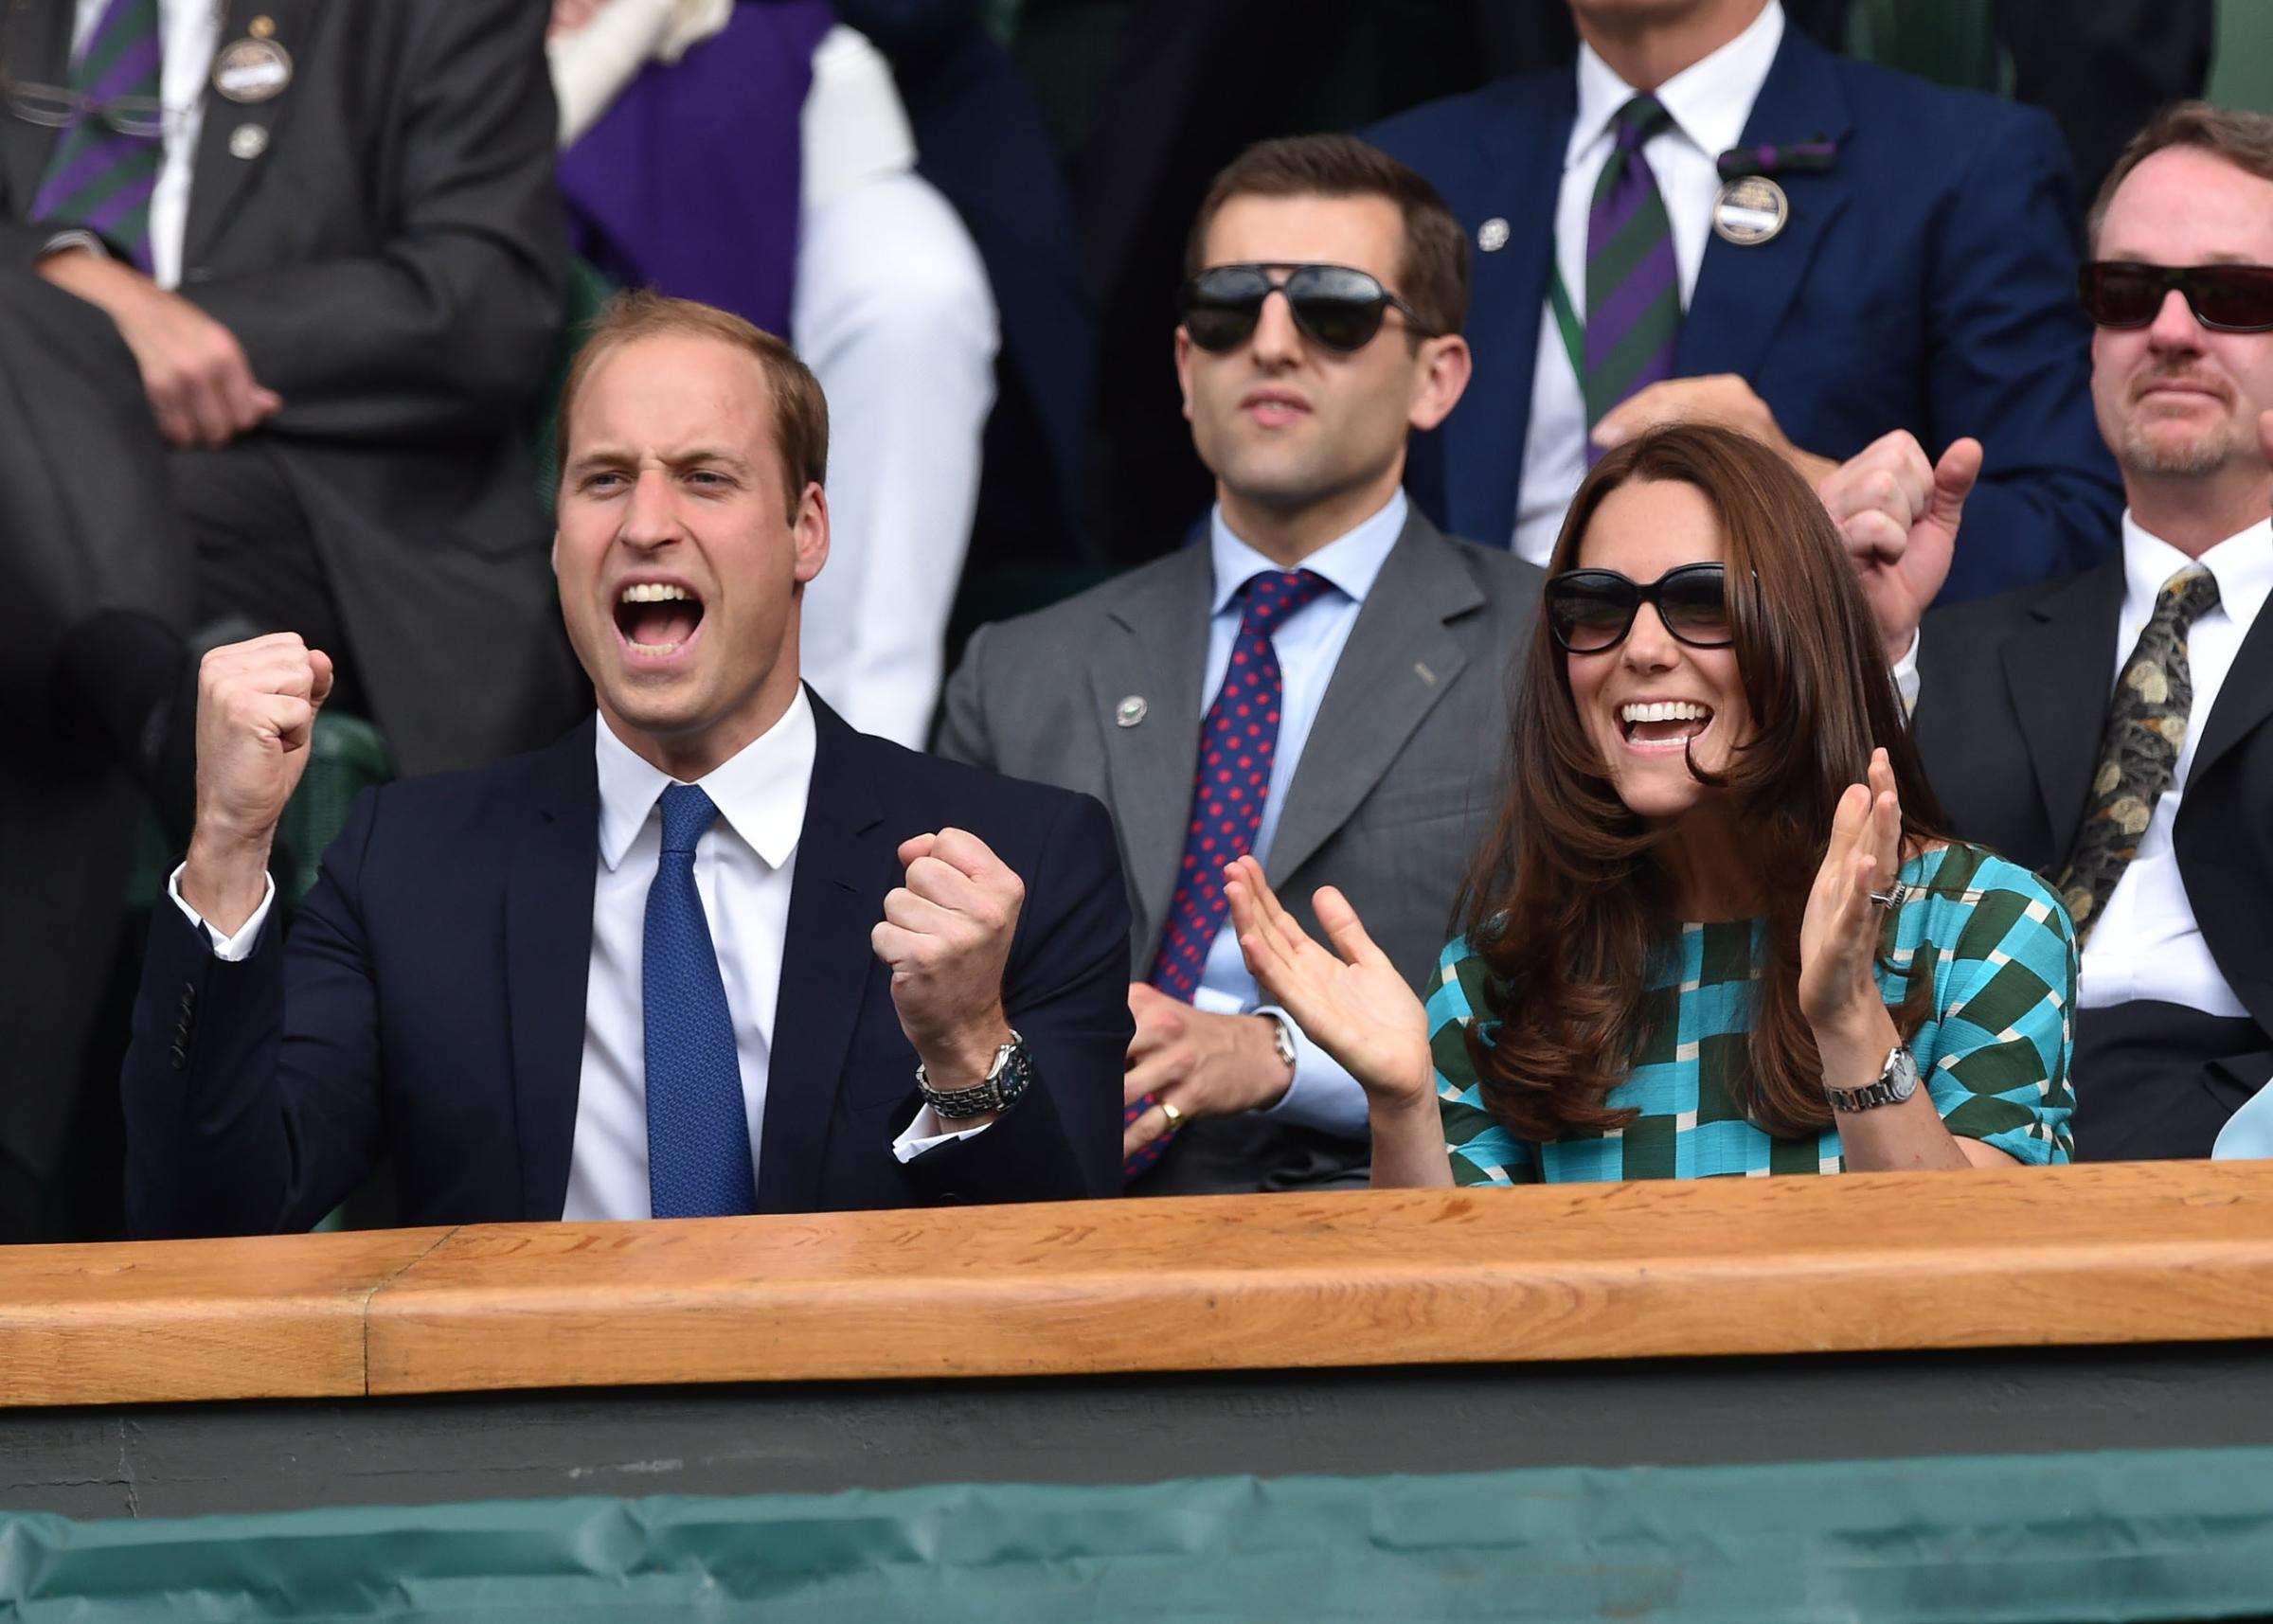 Catherine, Duchess of Cambridge and Prince William, Duke of Cambridge, attend the mens singles final between Novak Djokovic and Roger Federer on centre court during day thirteen of the Wimbledon Championships at Wimbledon in London on July 6, 2014.